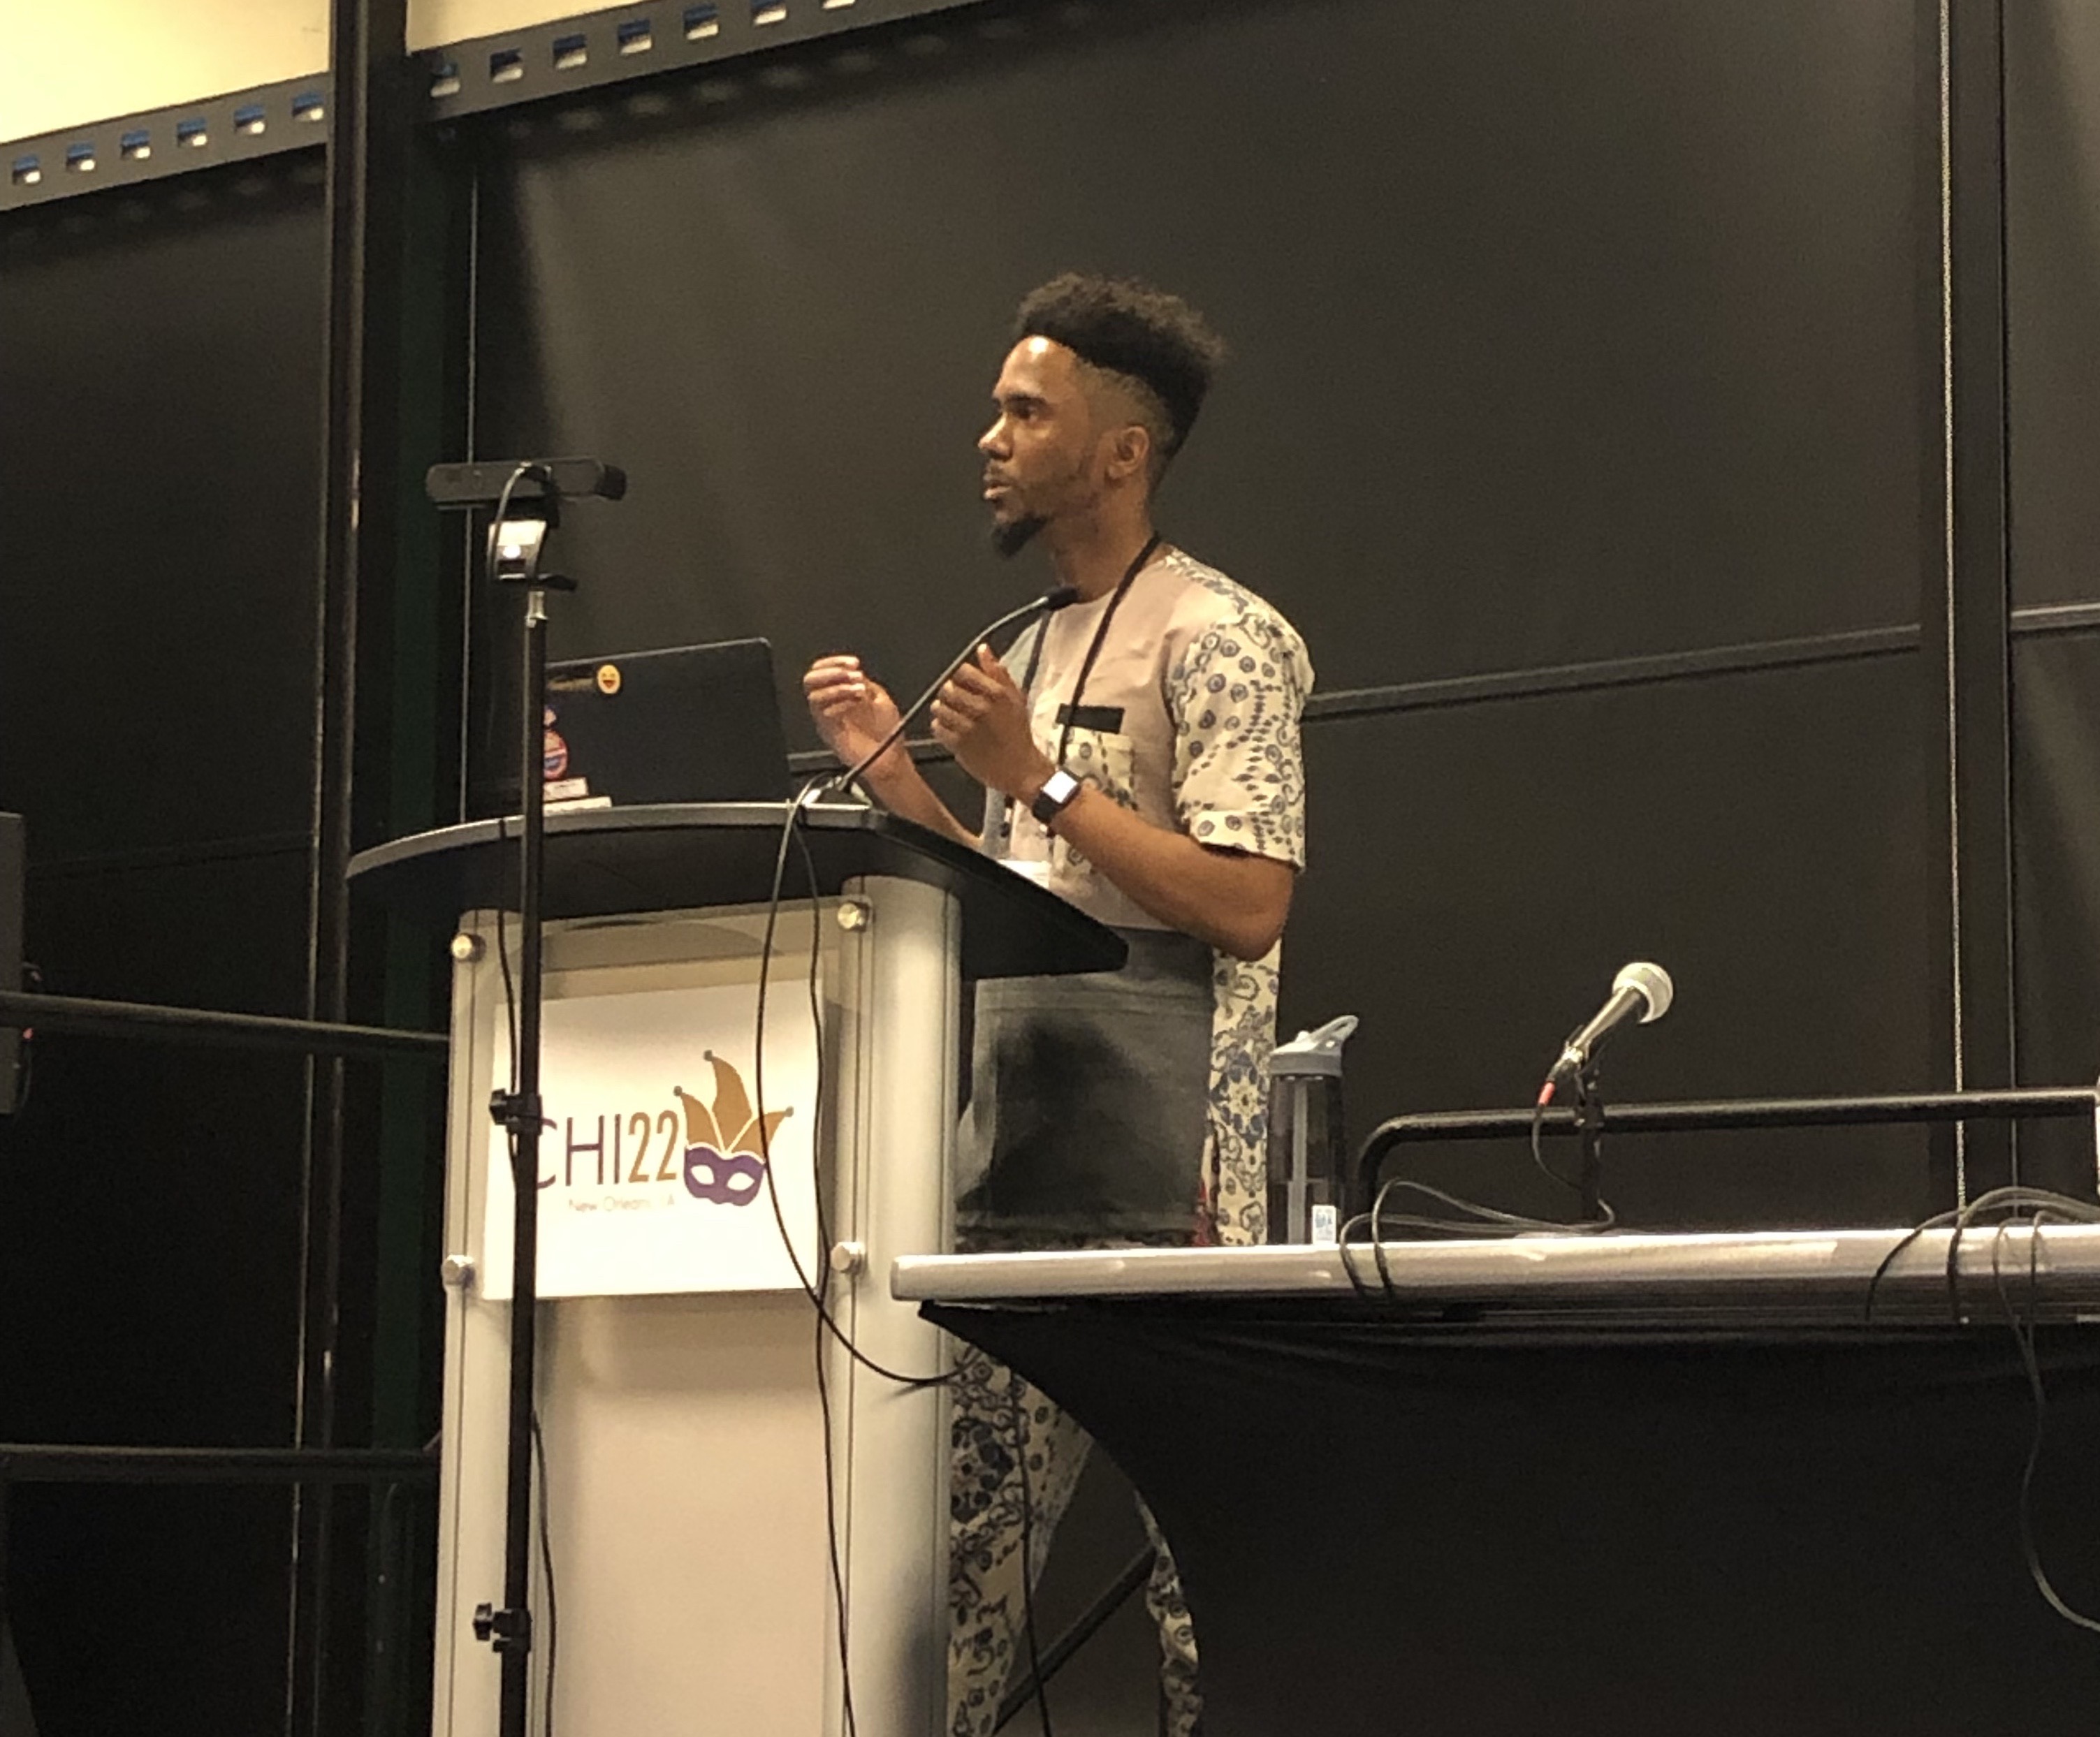 Gloire Rubambiza, a doctoral student in the field of computer science, presents his paper “Seamless Visions, Seamful Realities: Anticipating Rural Infrastructural Fragility in Early Design of Digital Agriculture,” at CHI on May 2, 2022.